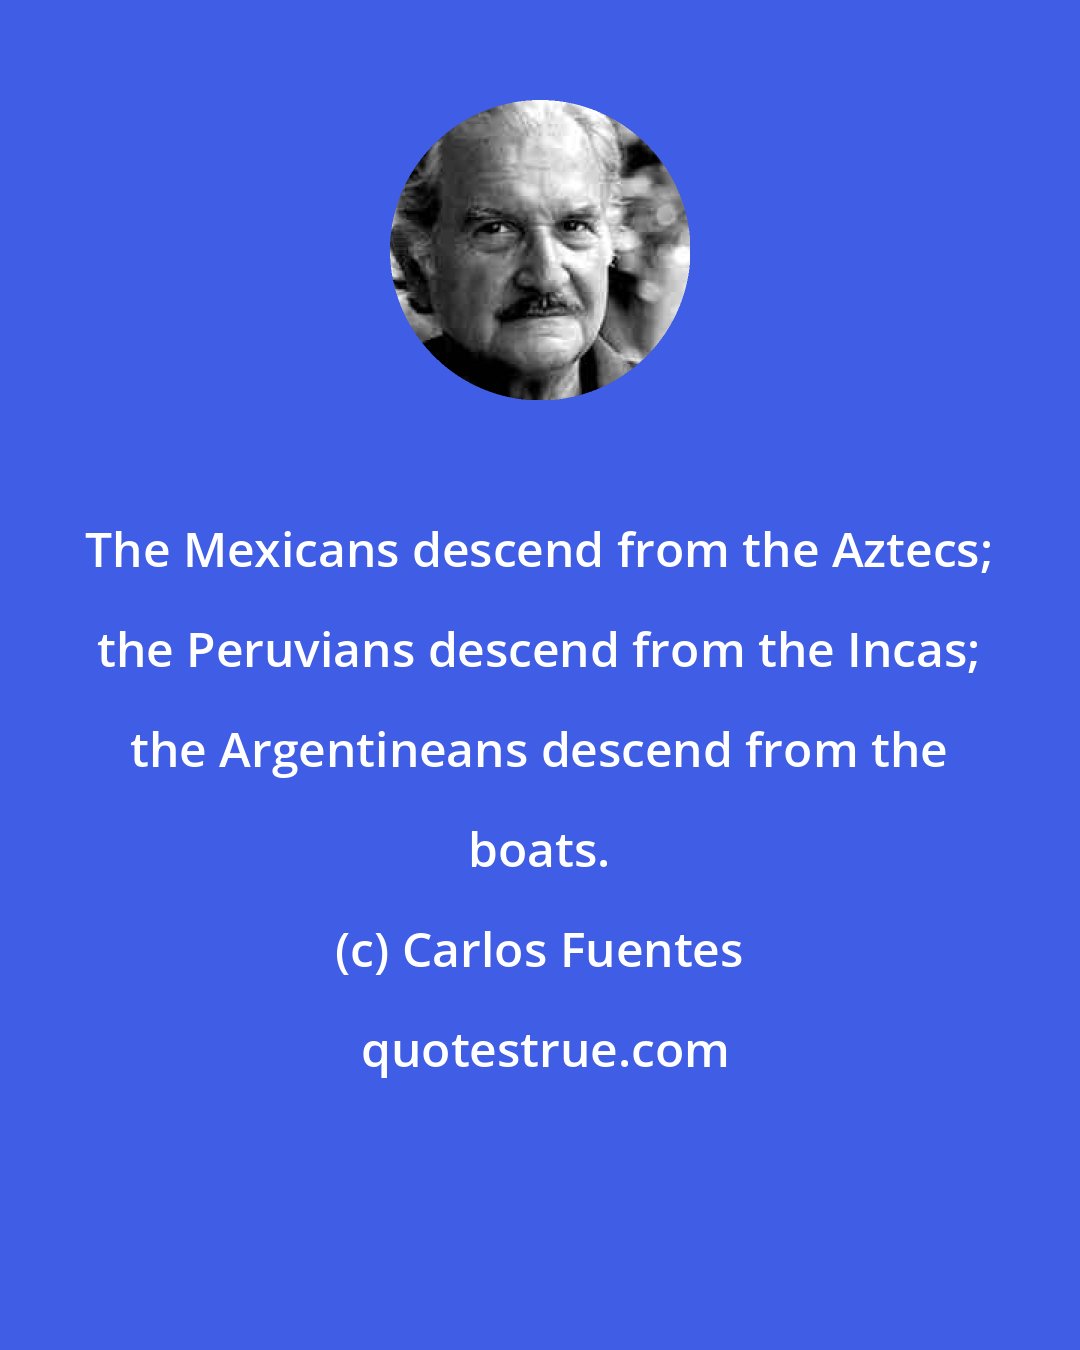 Carlos Fuentes: The Mexicans descend from the Aztecs; the Peruvians descend from the Incas; the Argentineans descend from the boats.